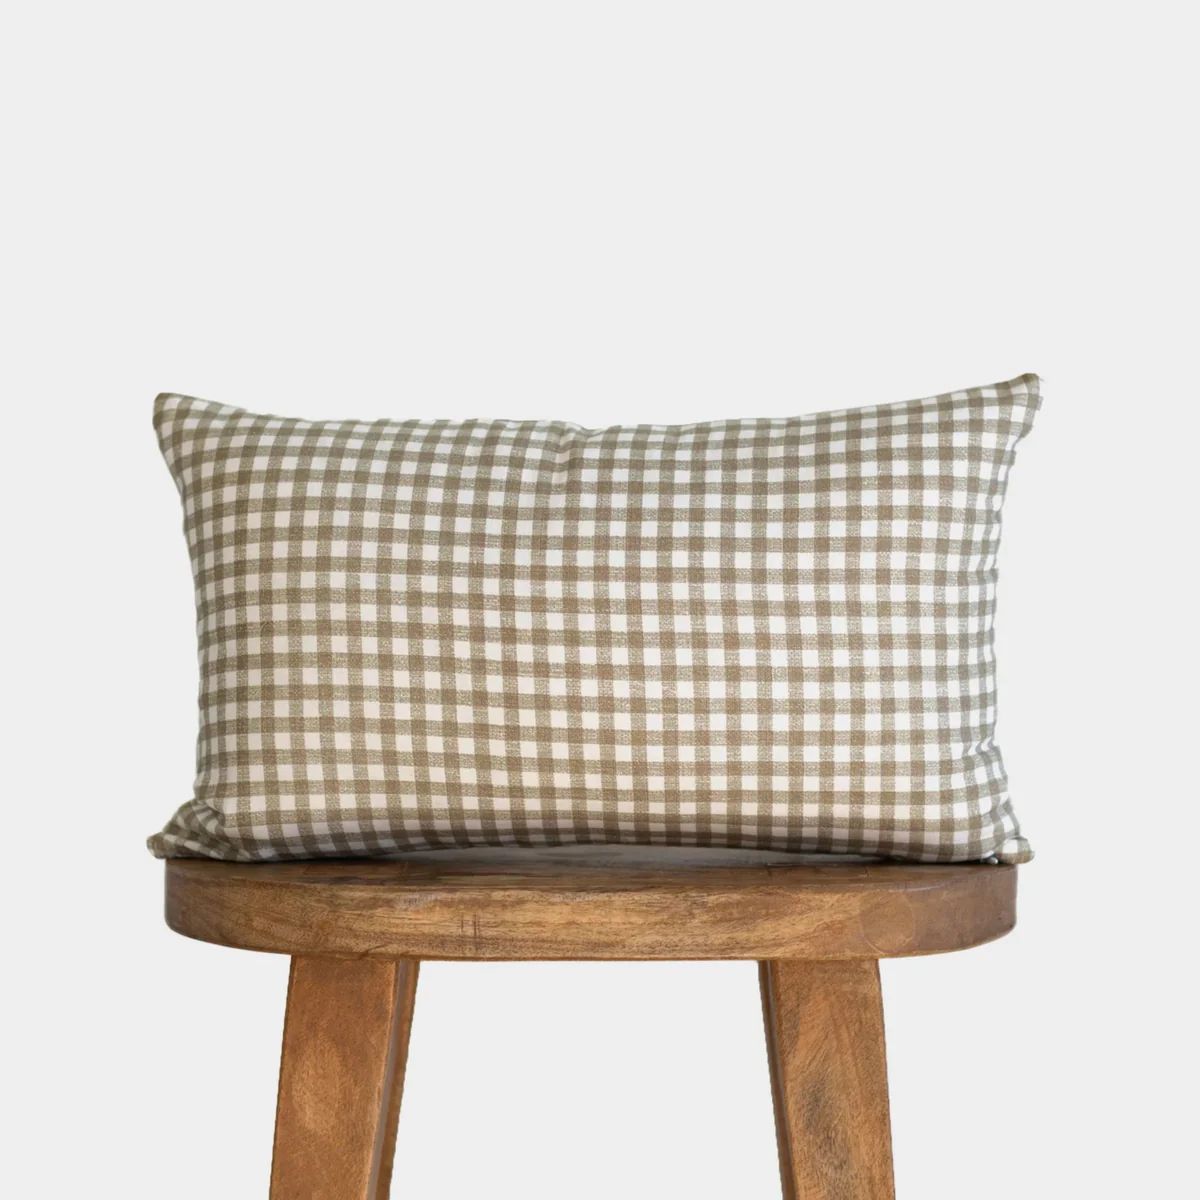 Gingham - 12x20" | Woven Nook